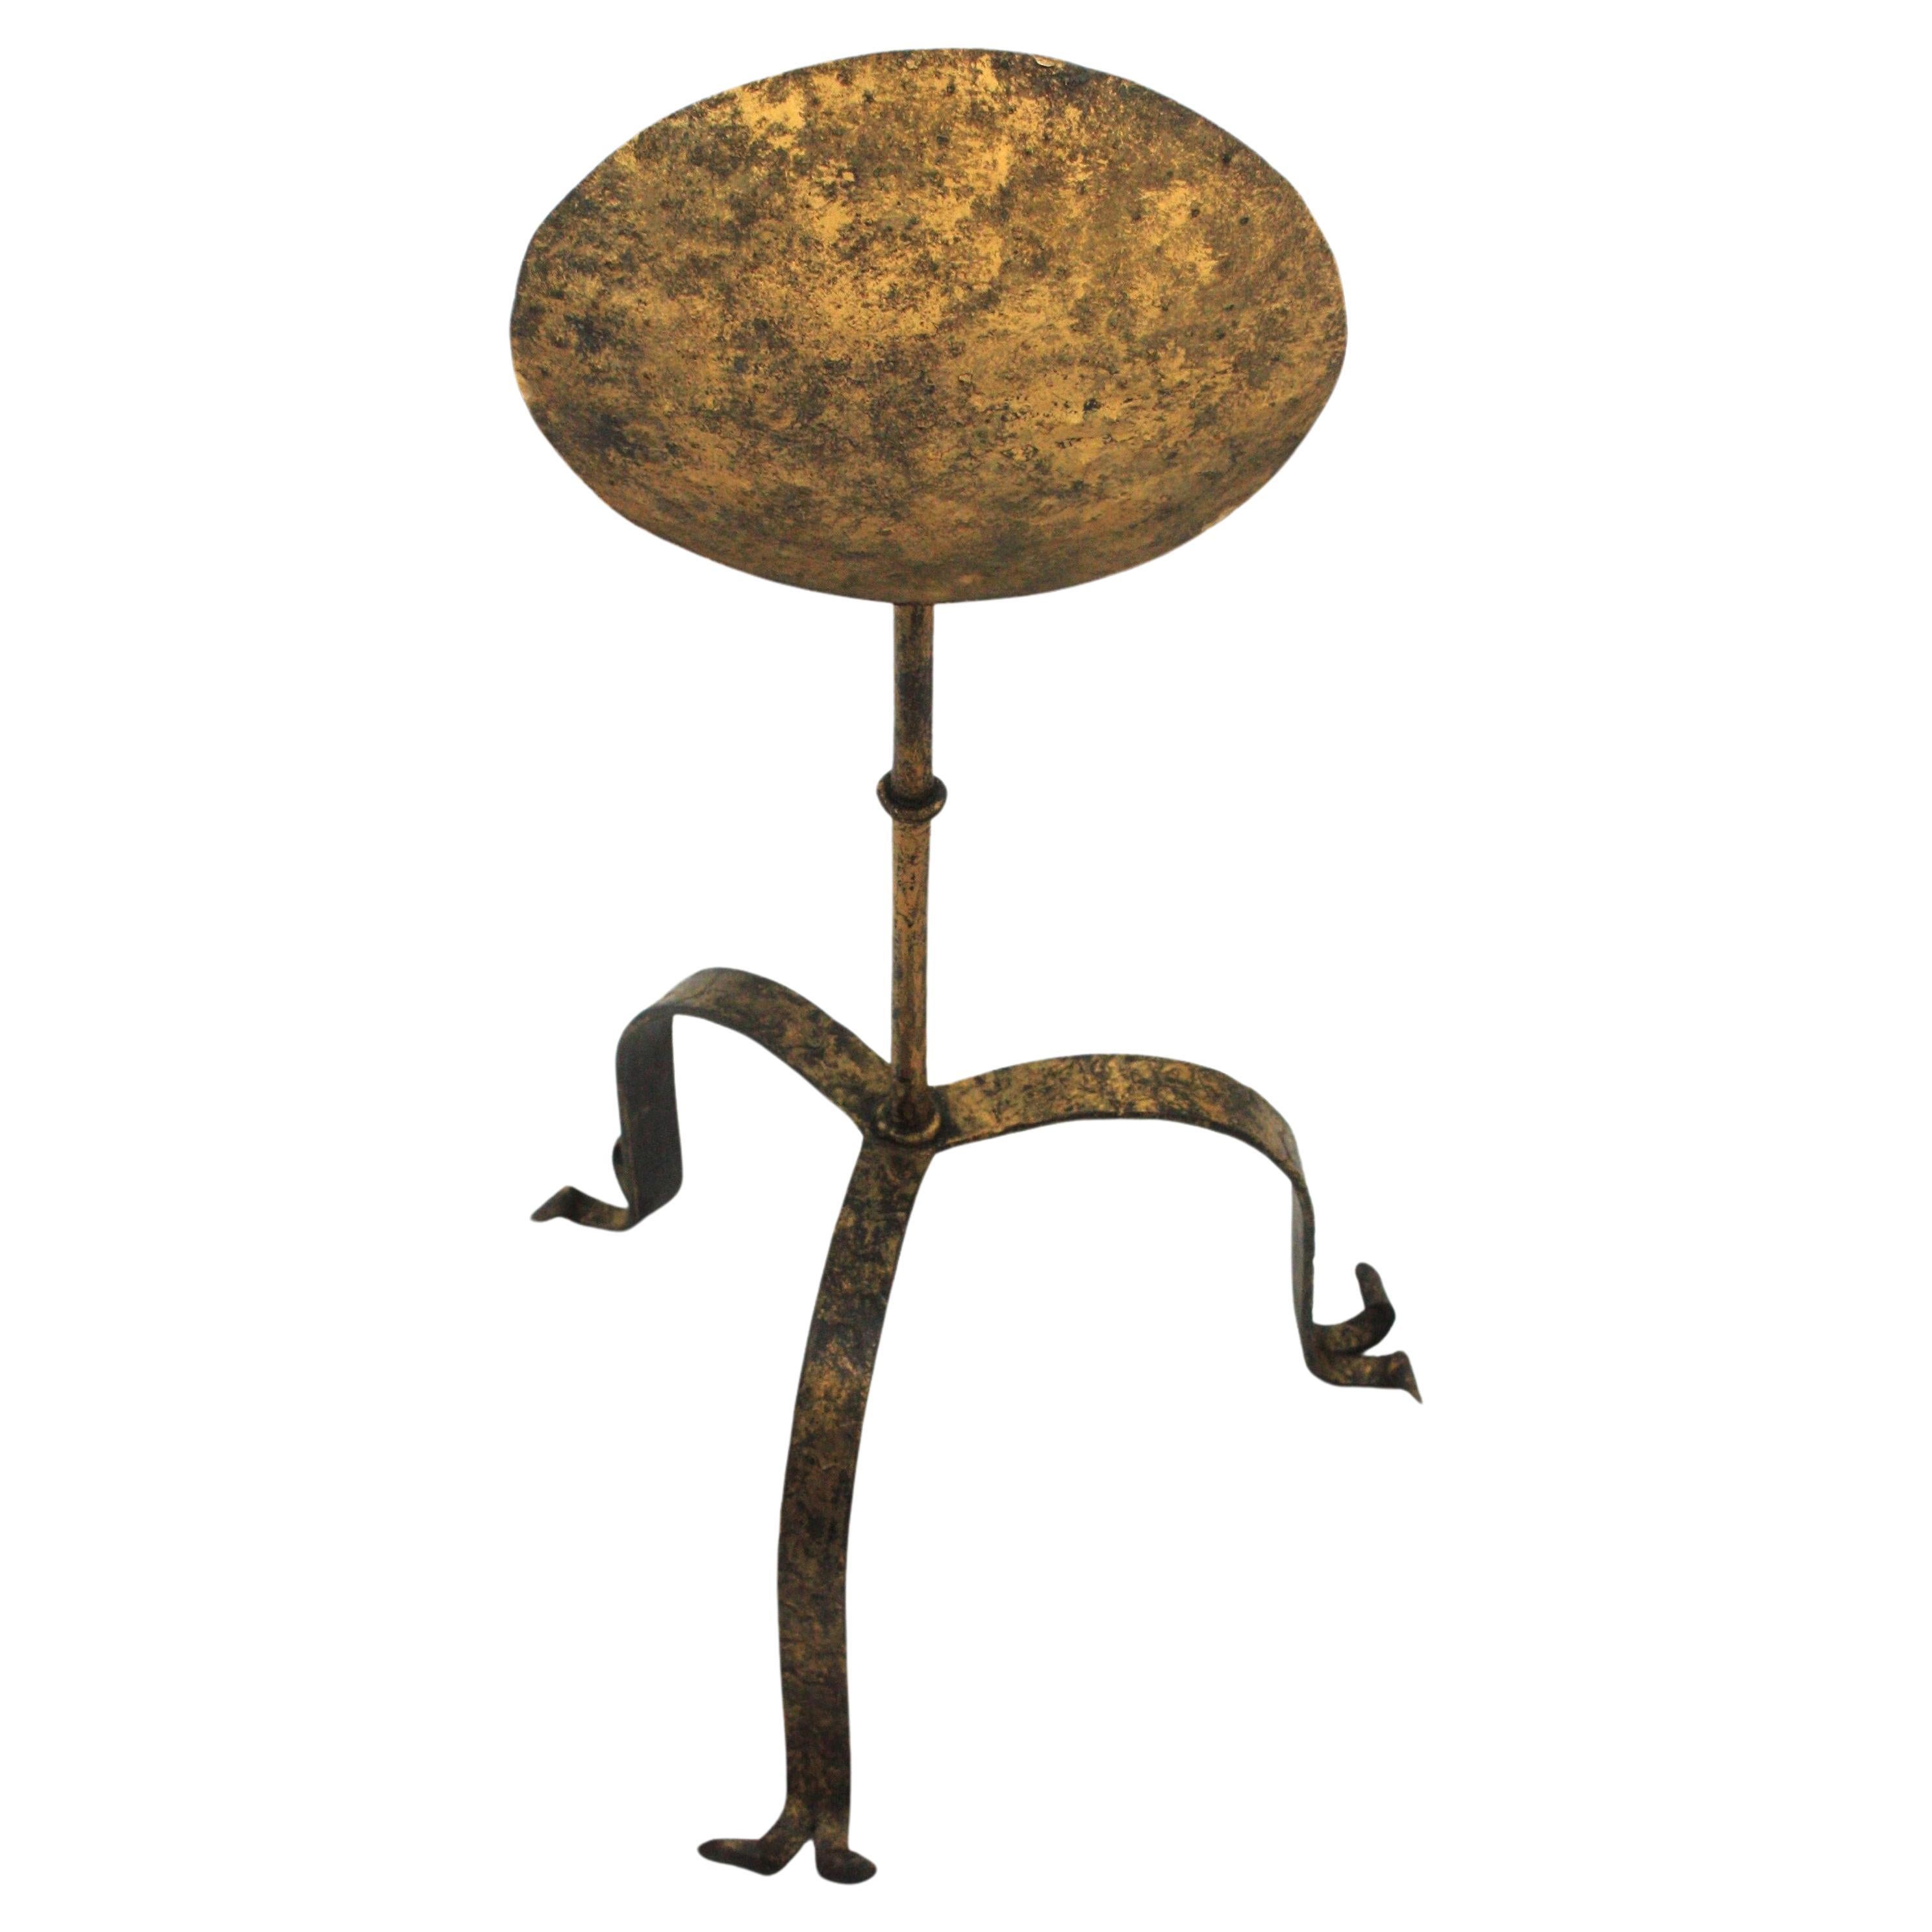 Spanish gilt wrought iron drink / cocktails table standing on a tripod base, Spain, 1940s.
Handcrafted in wrought iron with gilt finish. The round top stands on a tripod base with scroll ended feet. Nice patina.
It will be the perfect choice for a